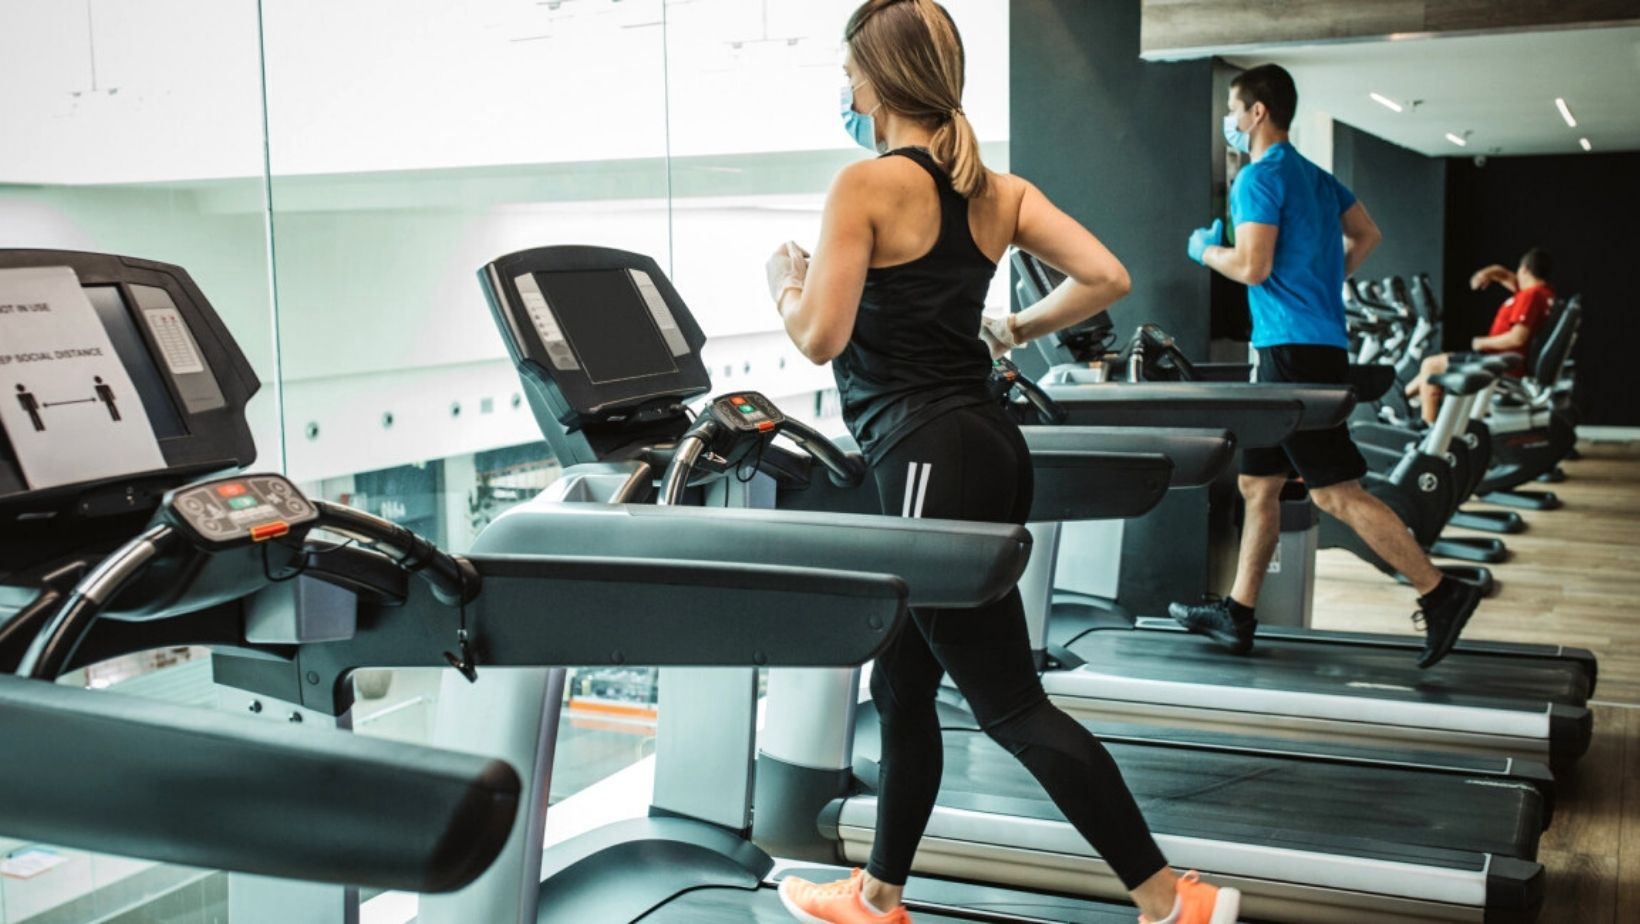 czech fitness centers prices